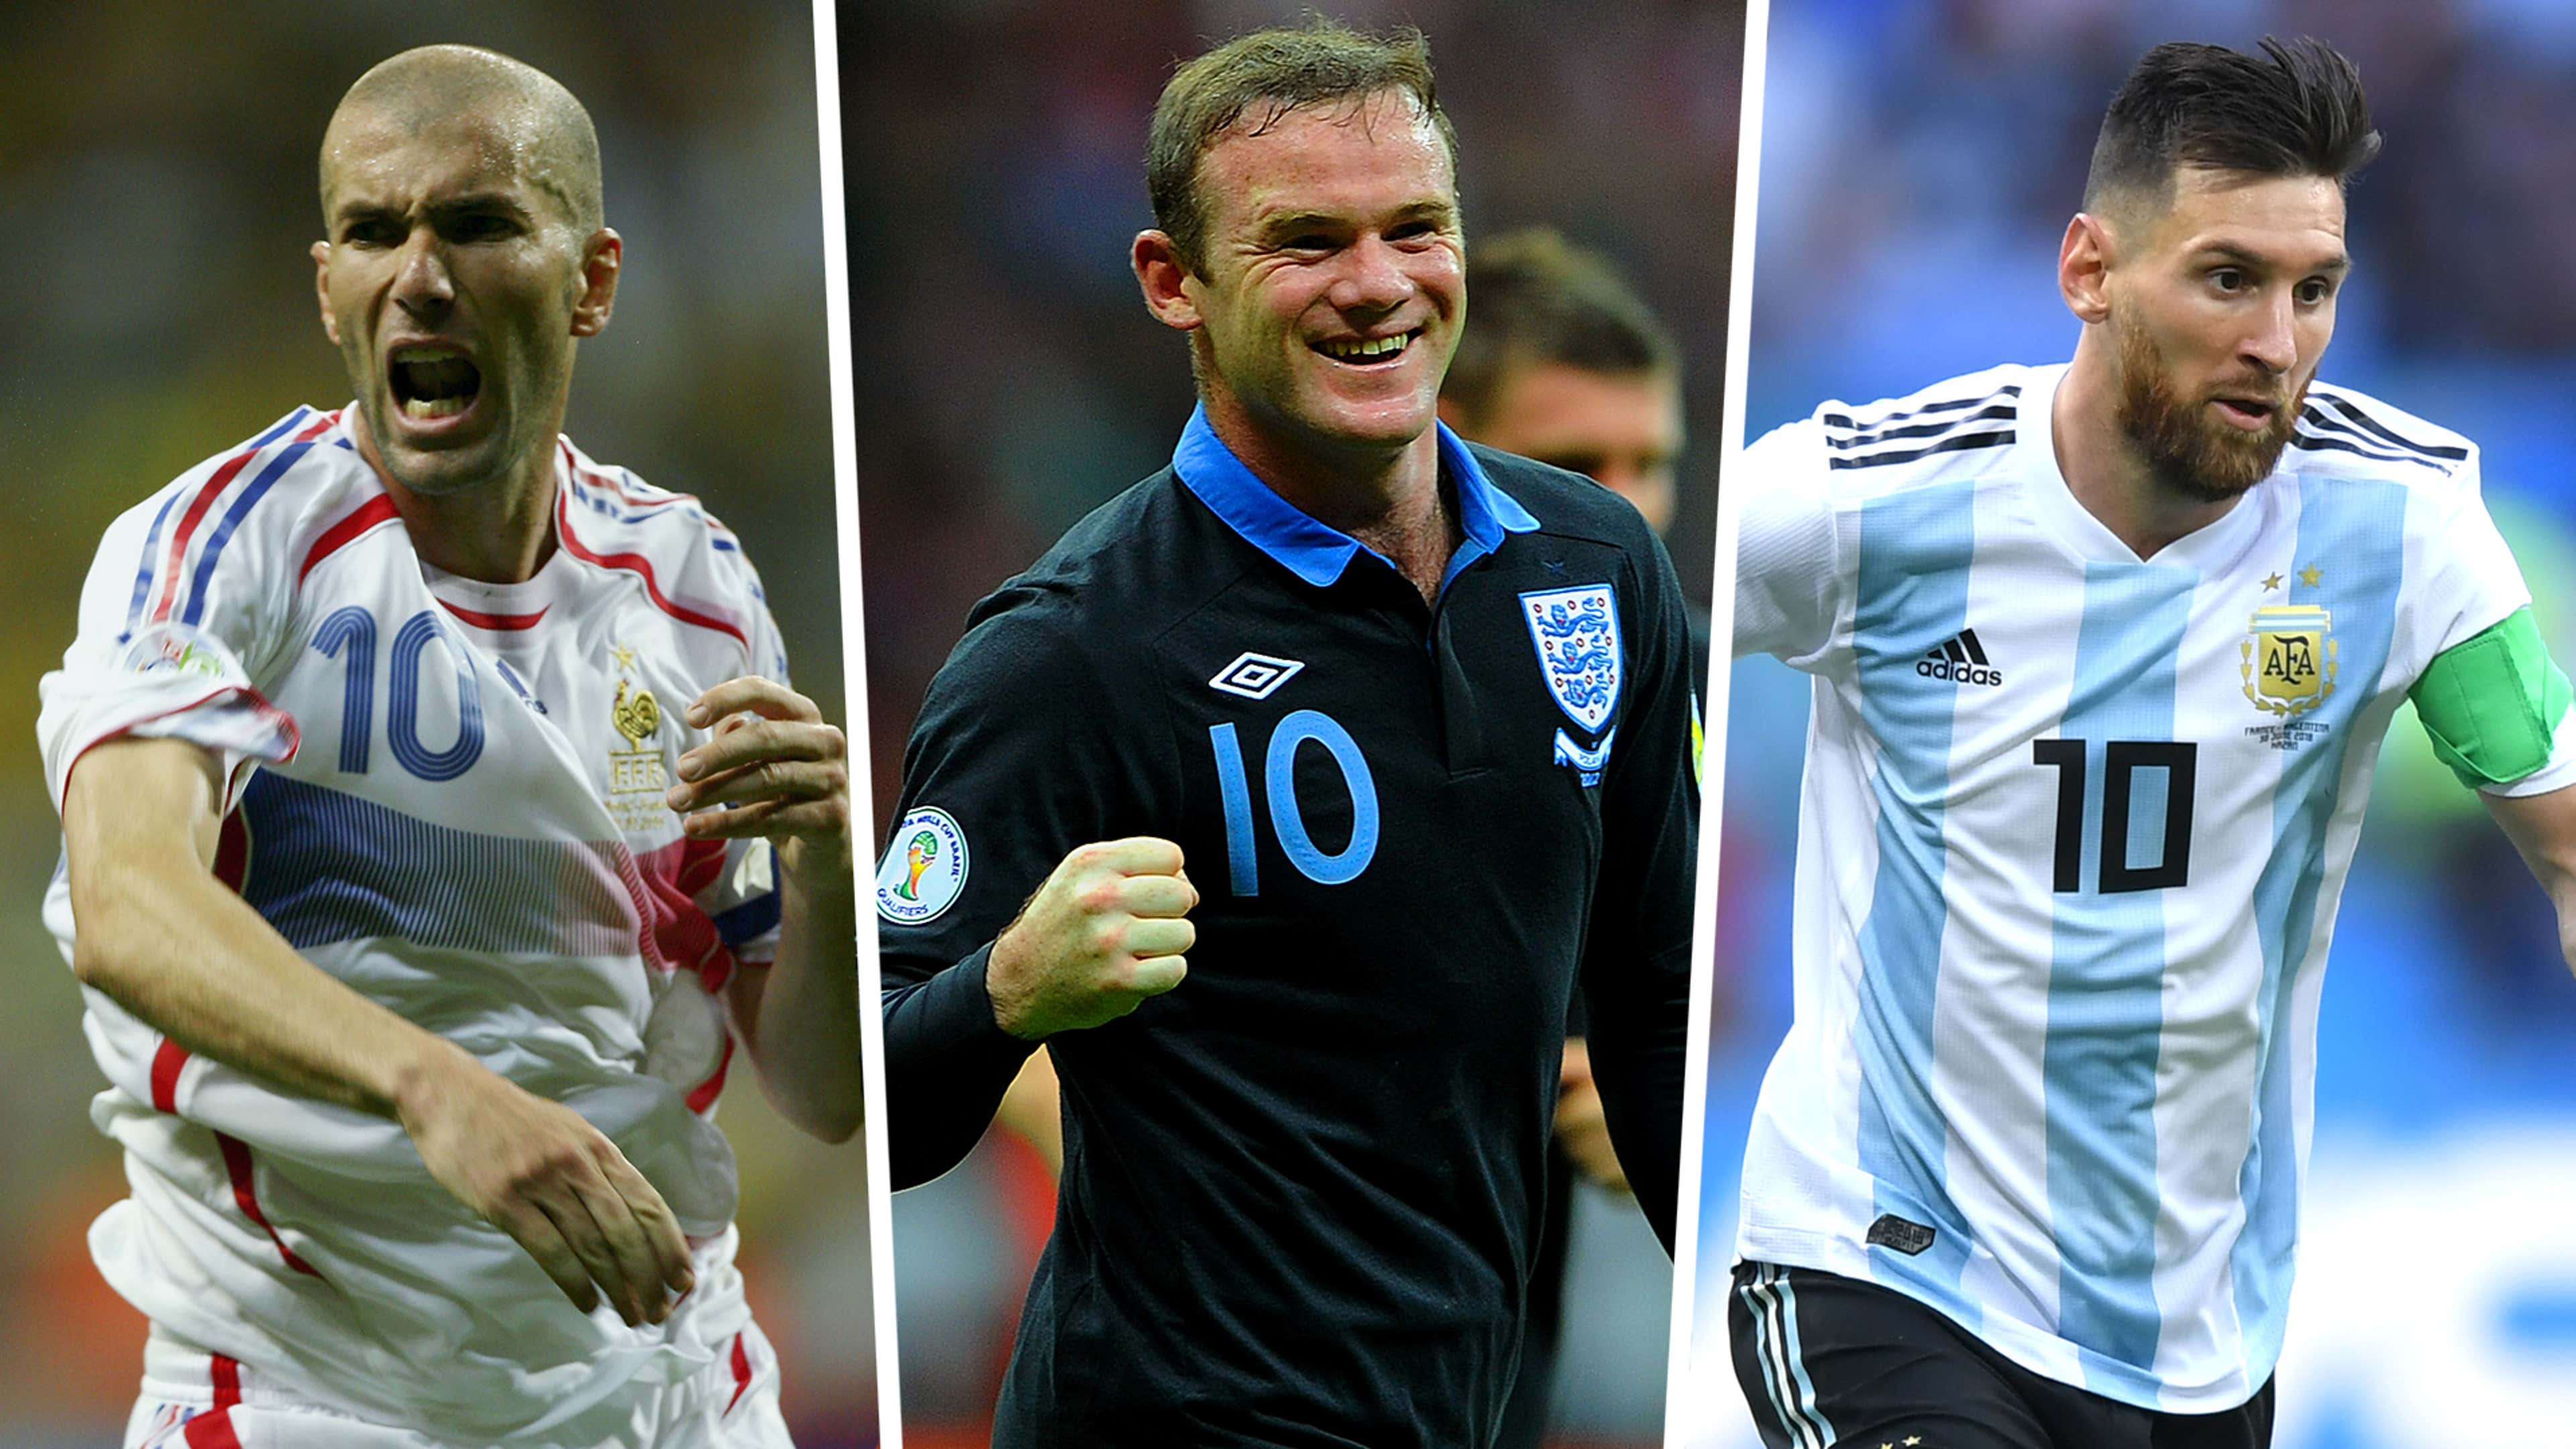 Players who have reversed international retirement